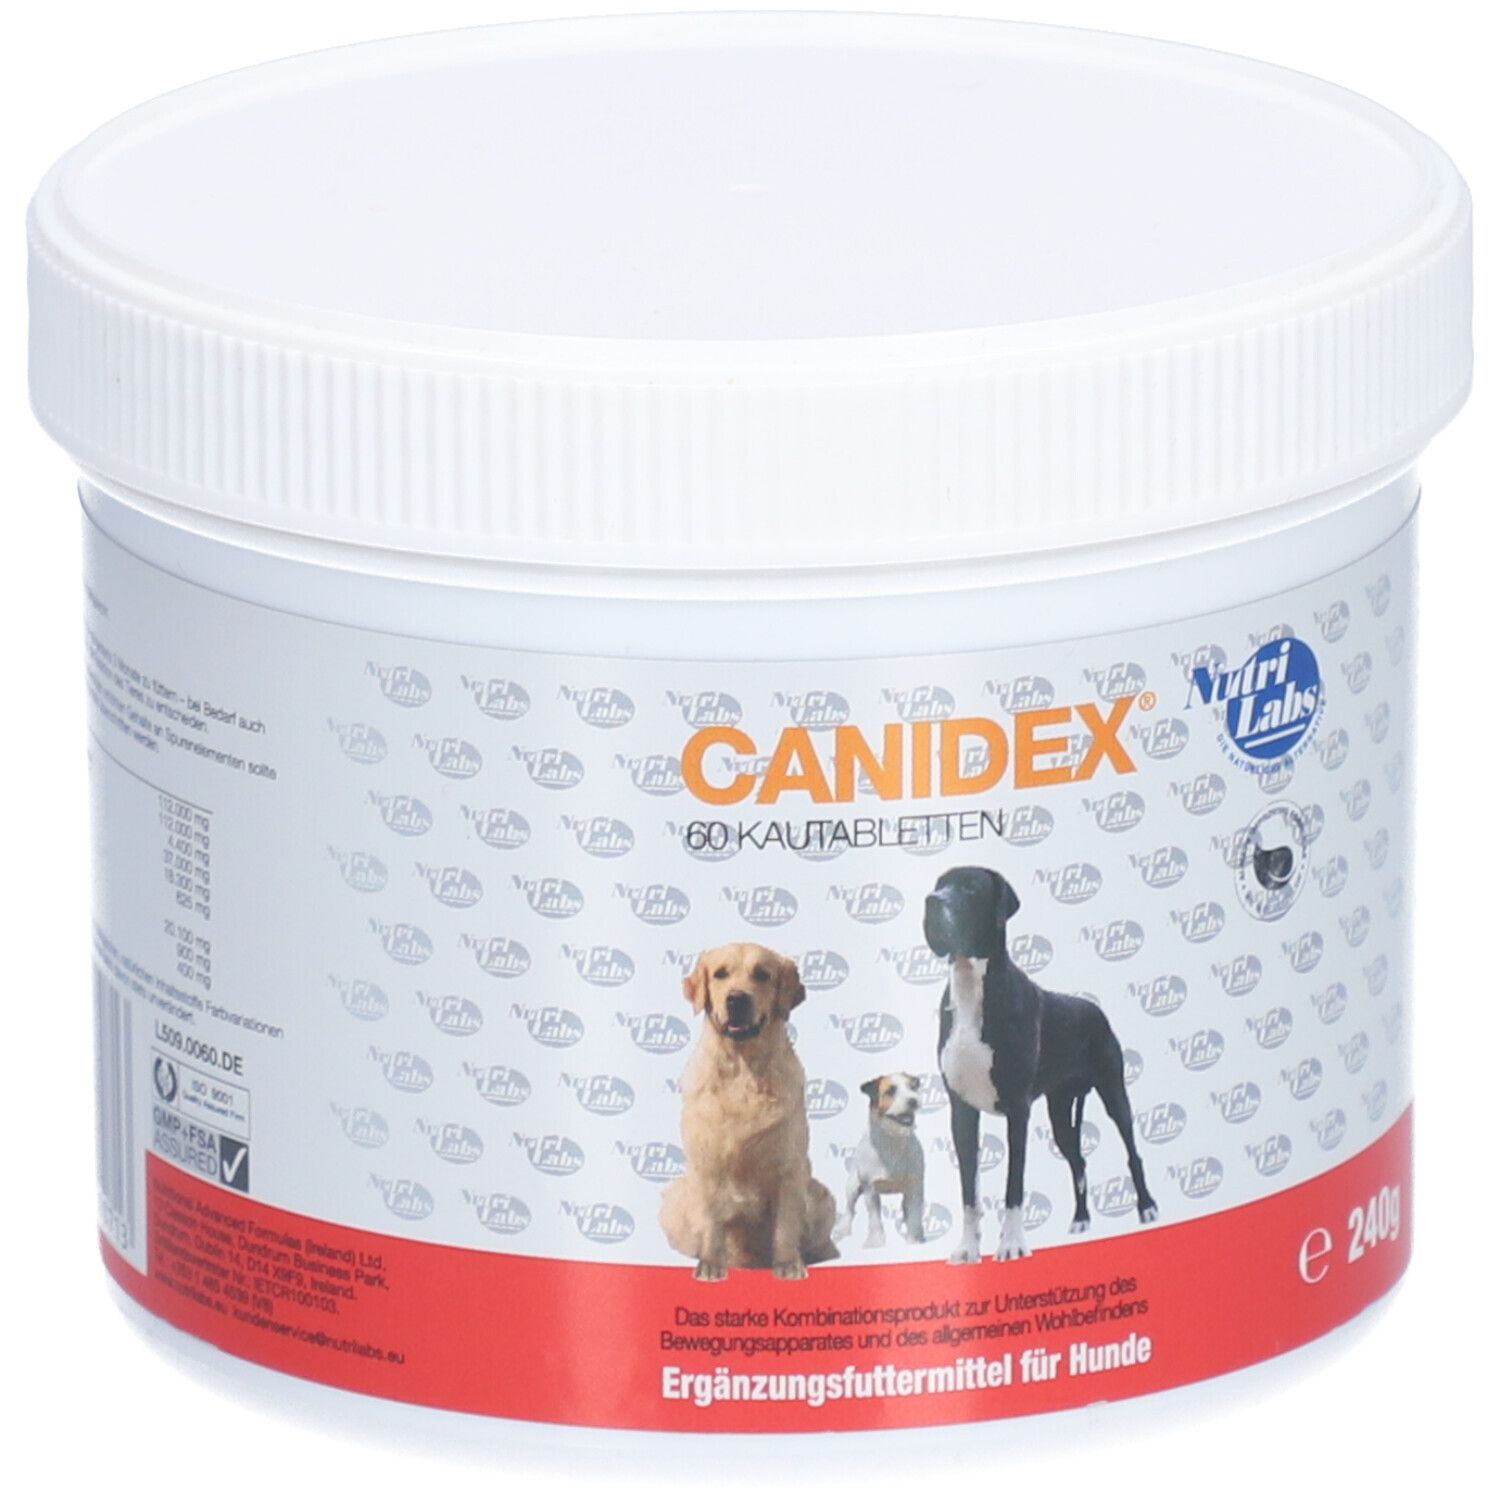 Nutrilabs Canidex